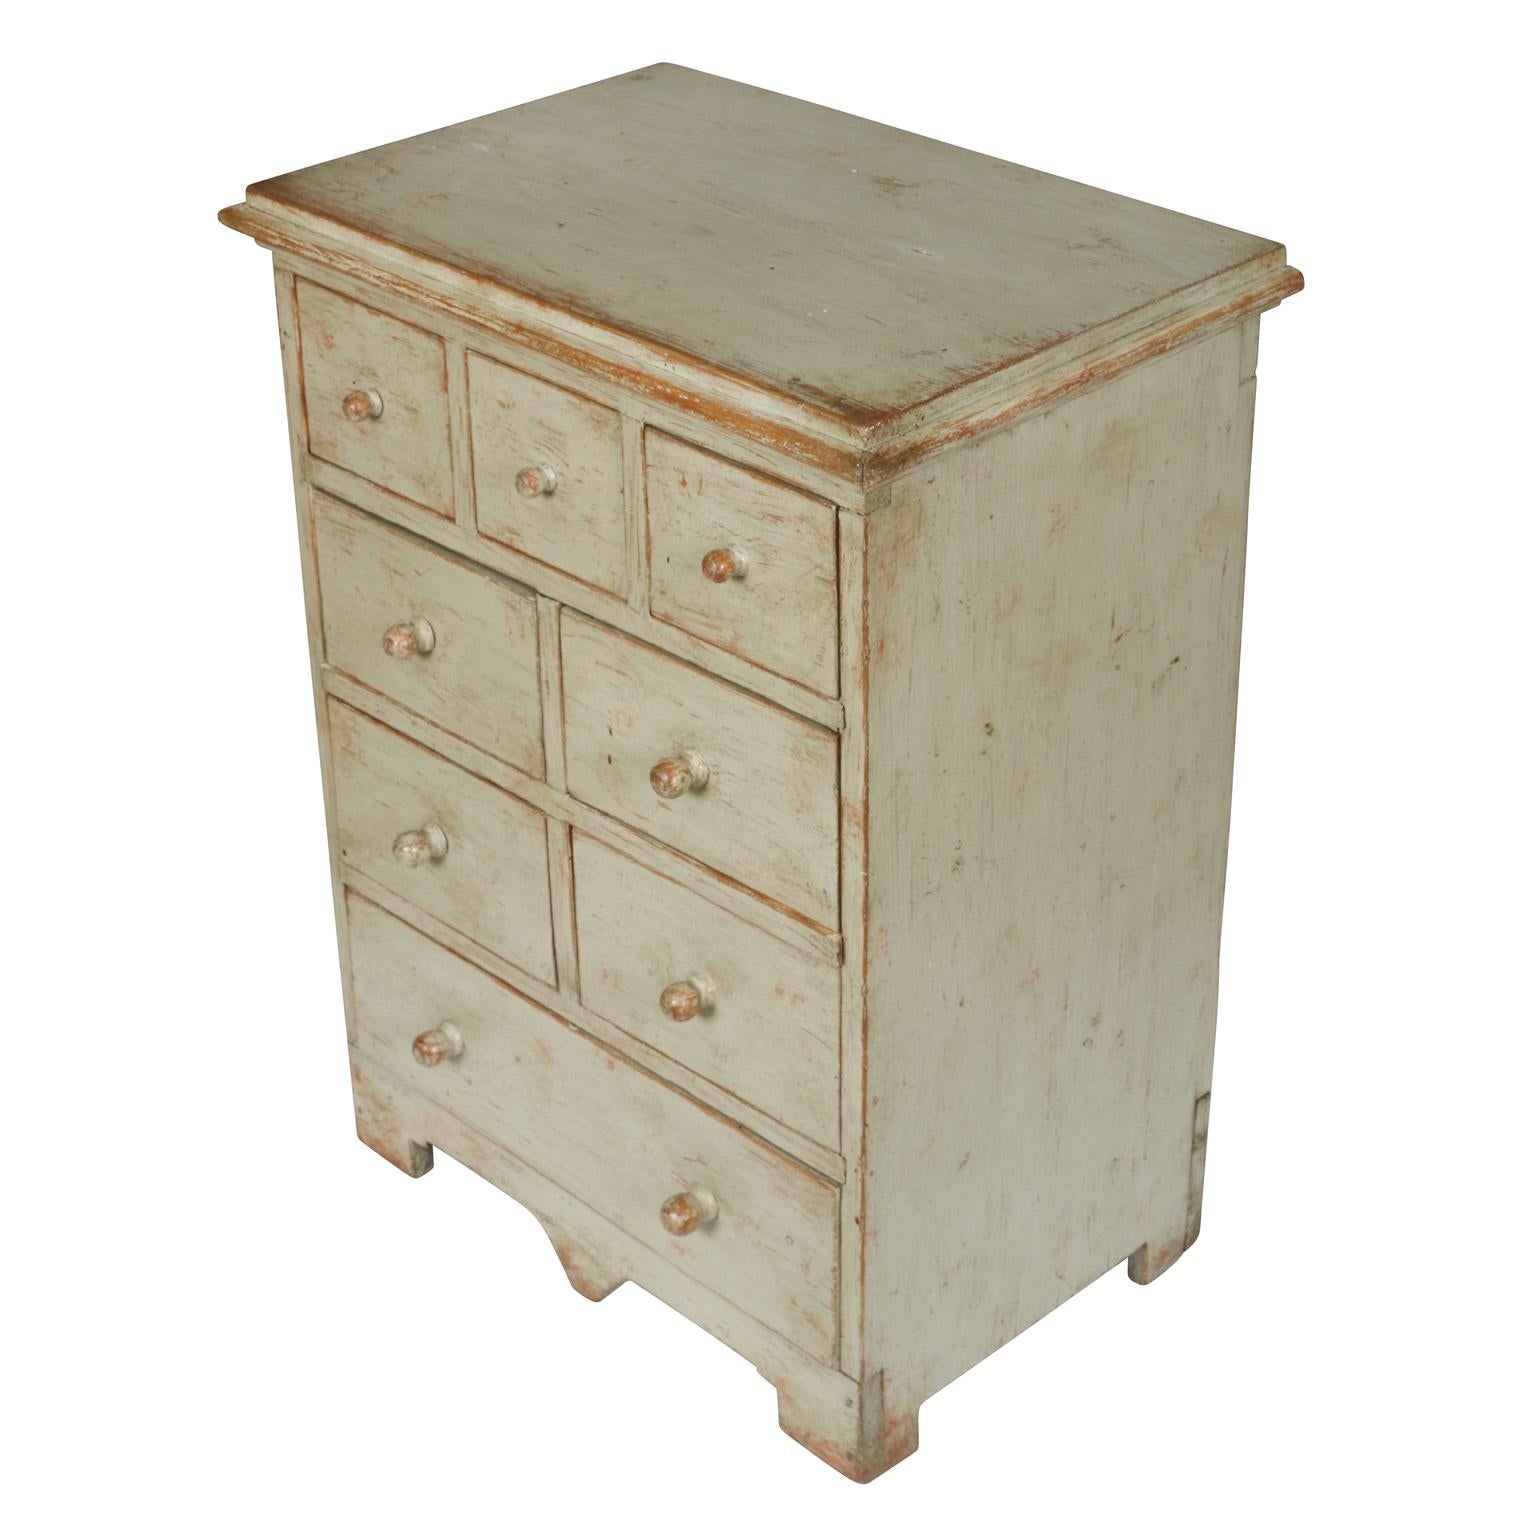 A sweet little painted chest with eight drawers in different sizes. The piece is painted in a soft gray blue and its size make it versatile--it can serve a purpose in any room or office.